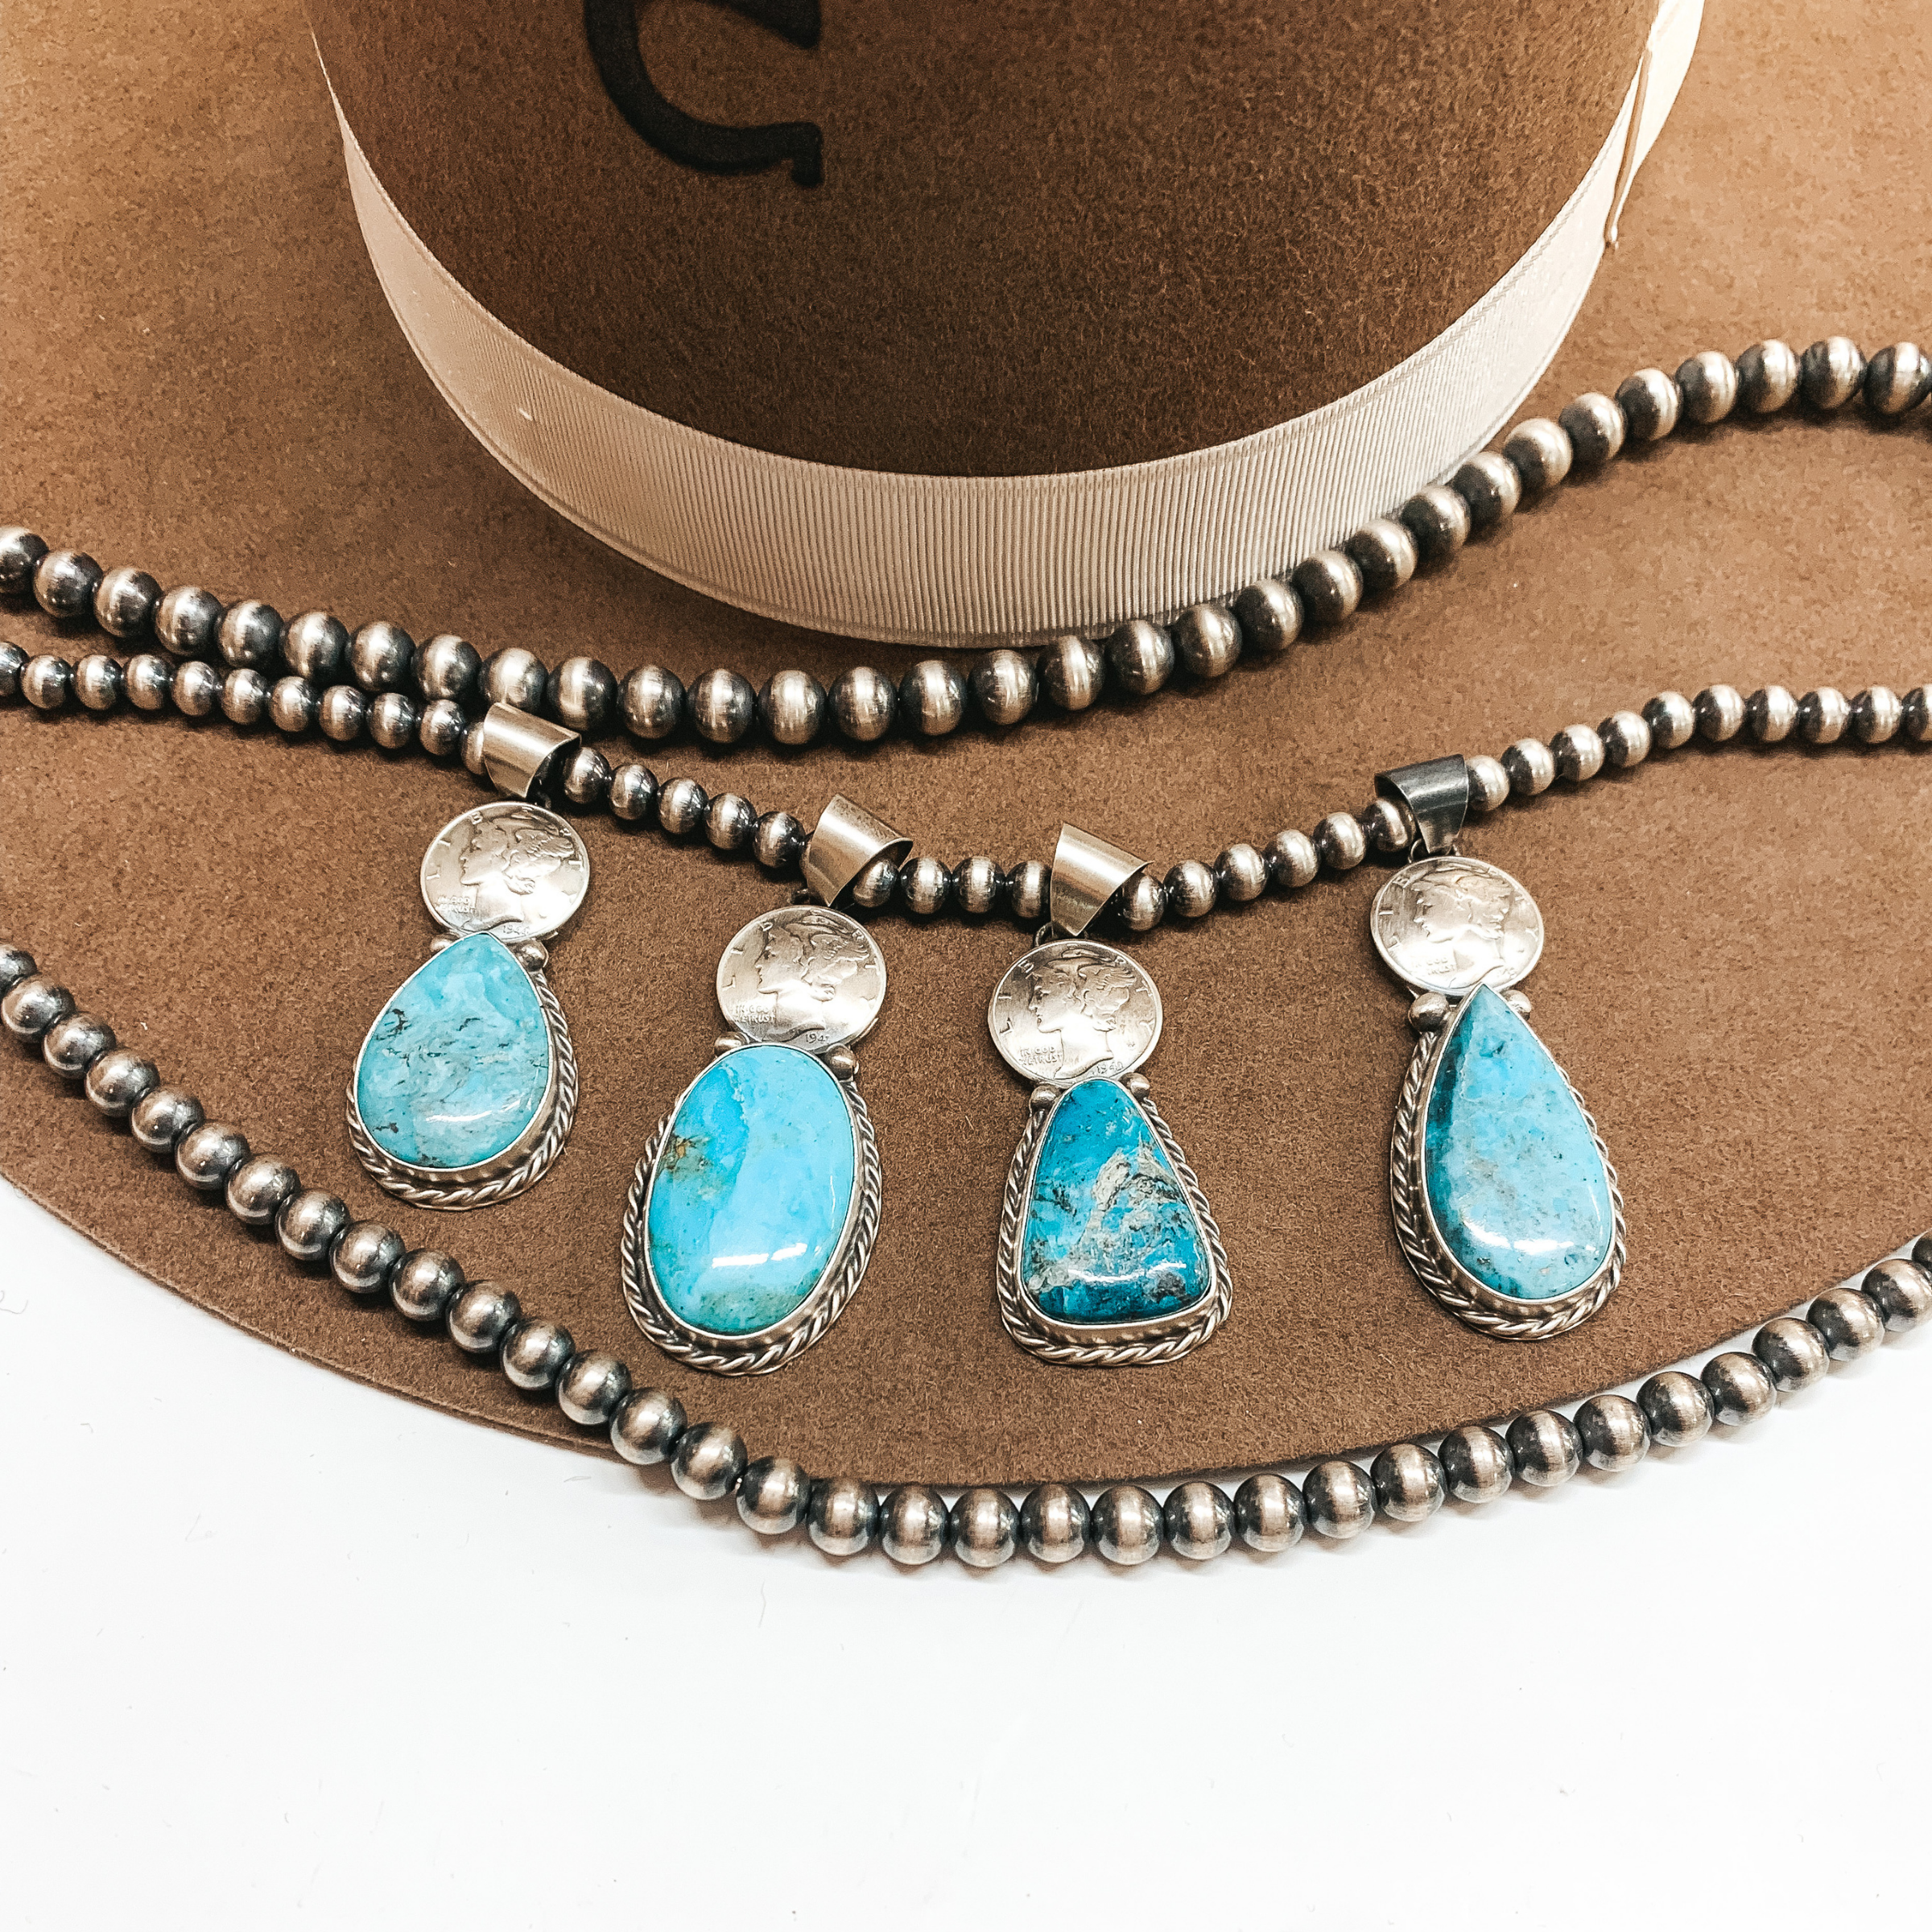 Betta Lee | Navajo Handmade Coin Pendant with Kingman Turquoise Drop - Giddy Up Glamour Boutique